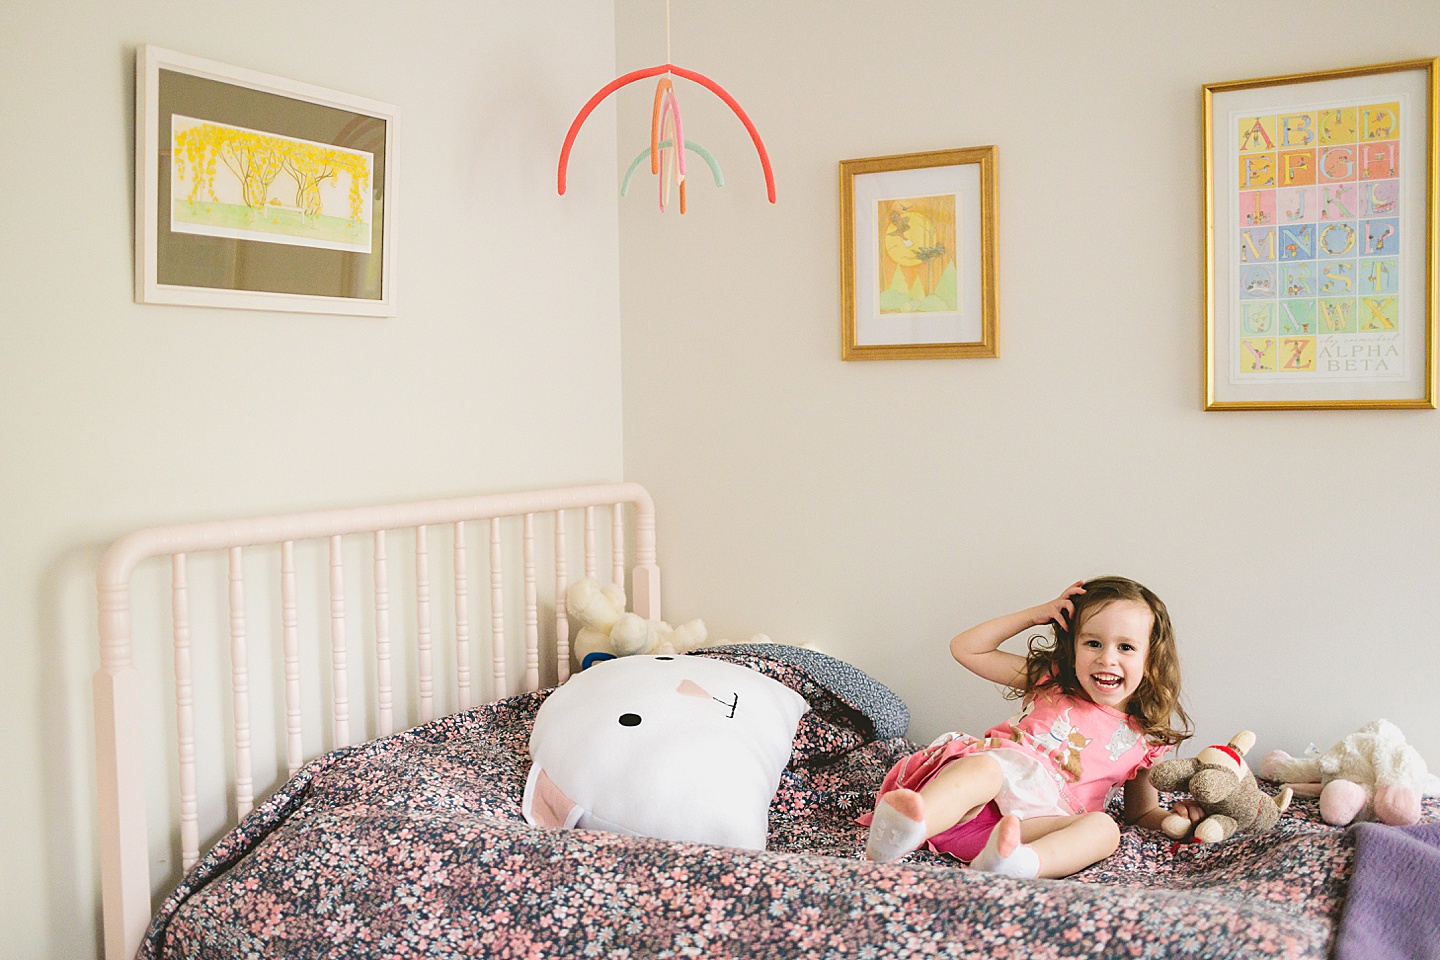 Girl jumping on a bed with cat doll and cat pillow